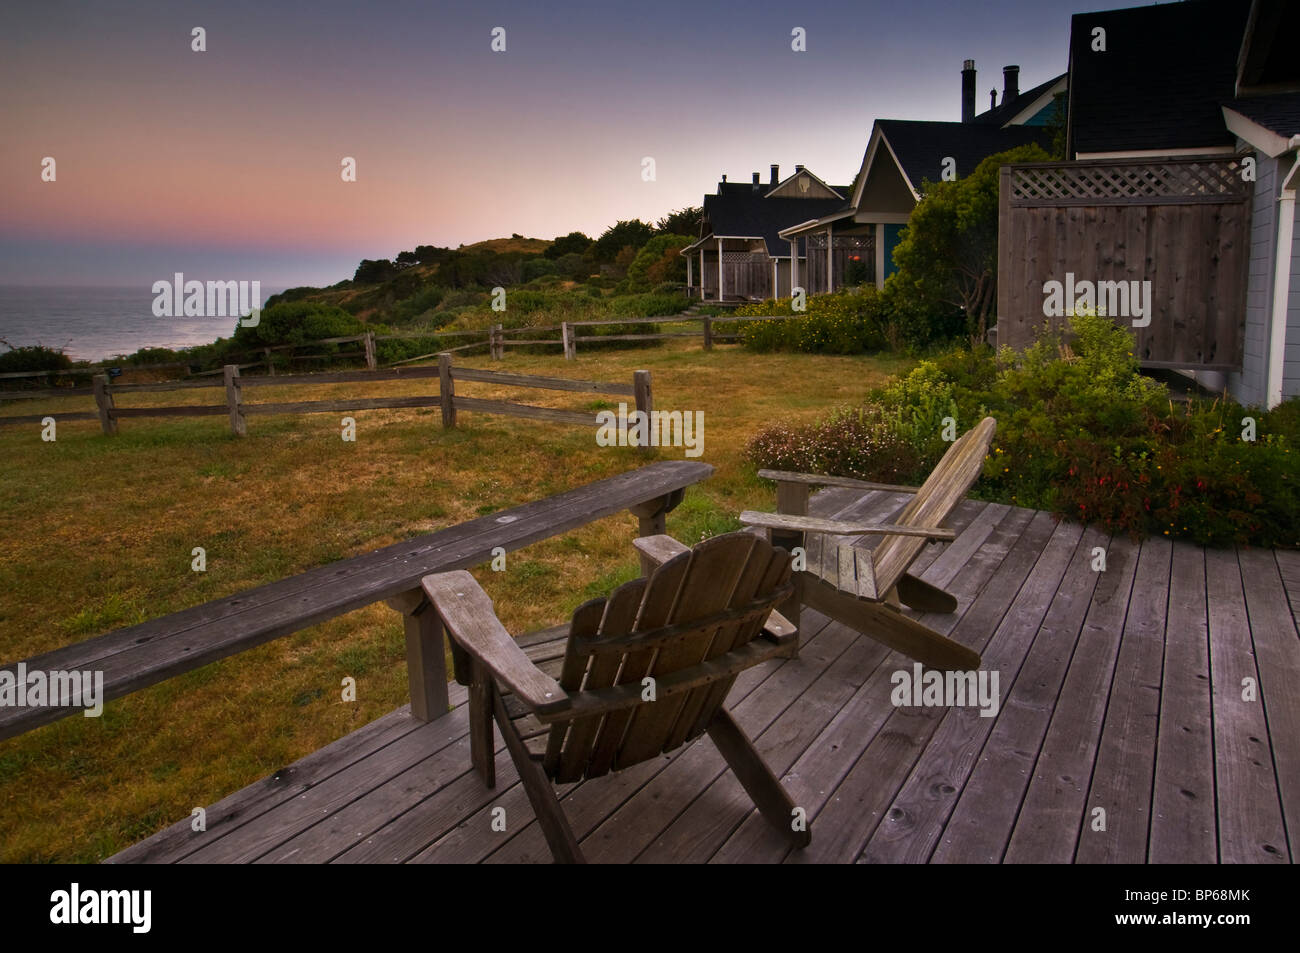 Wooden Deck Chairs With View Of Ocean From Guest Cottages At